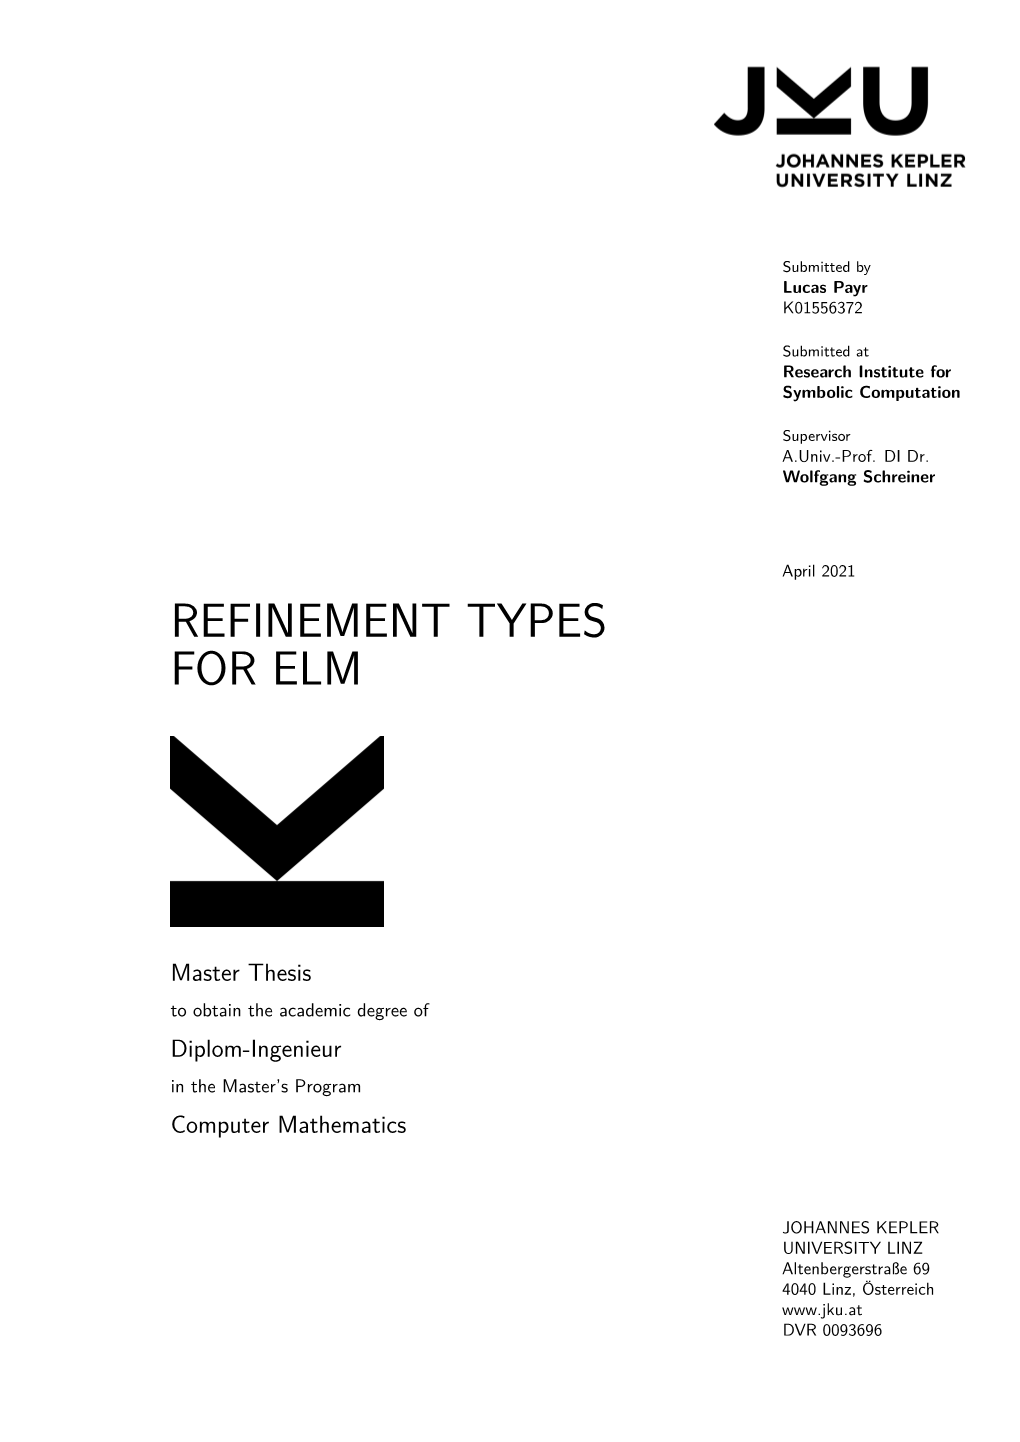 Refinement Types for Elm